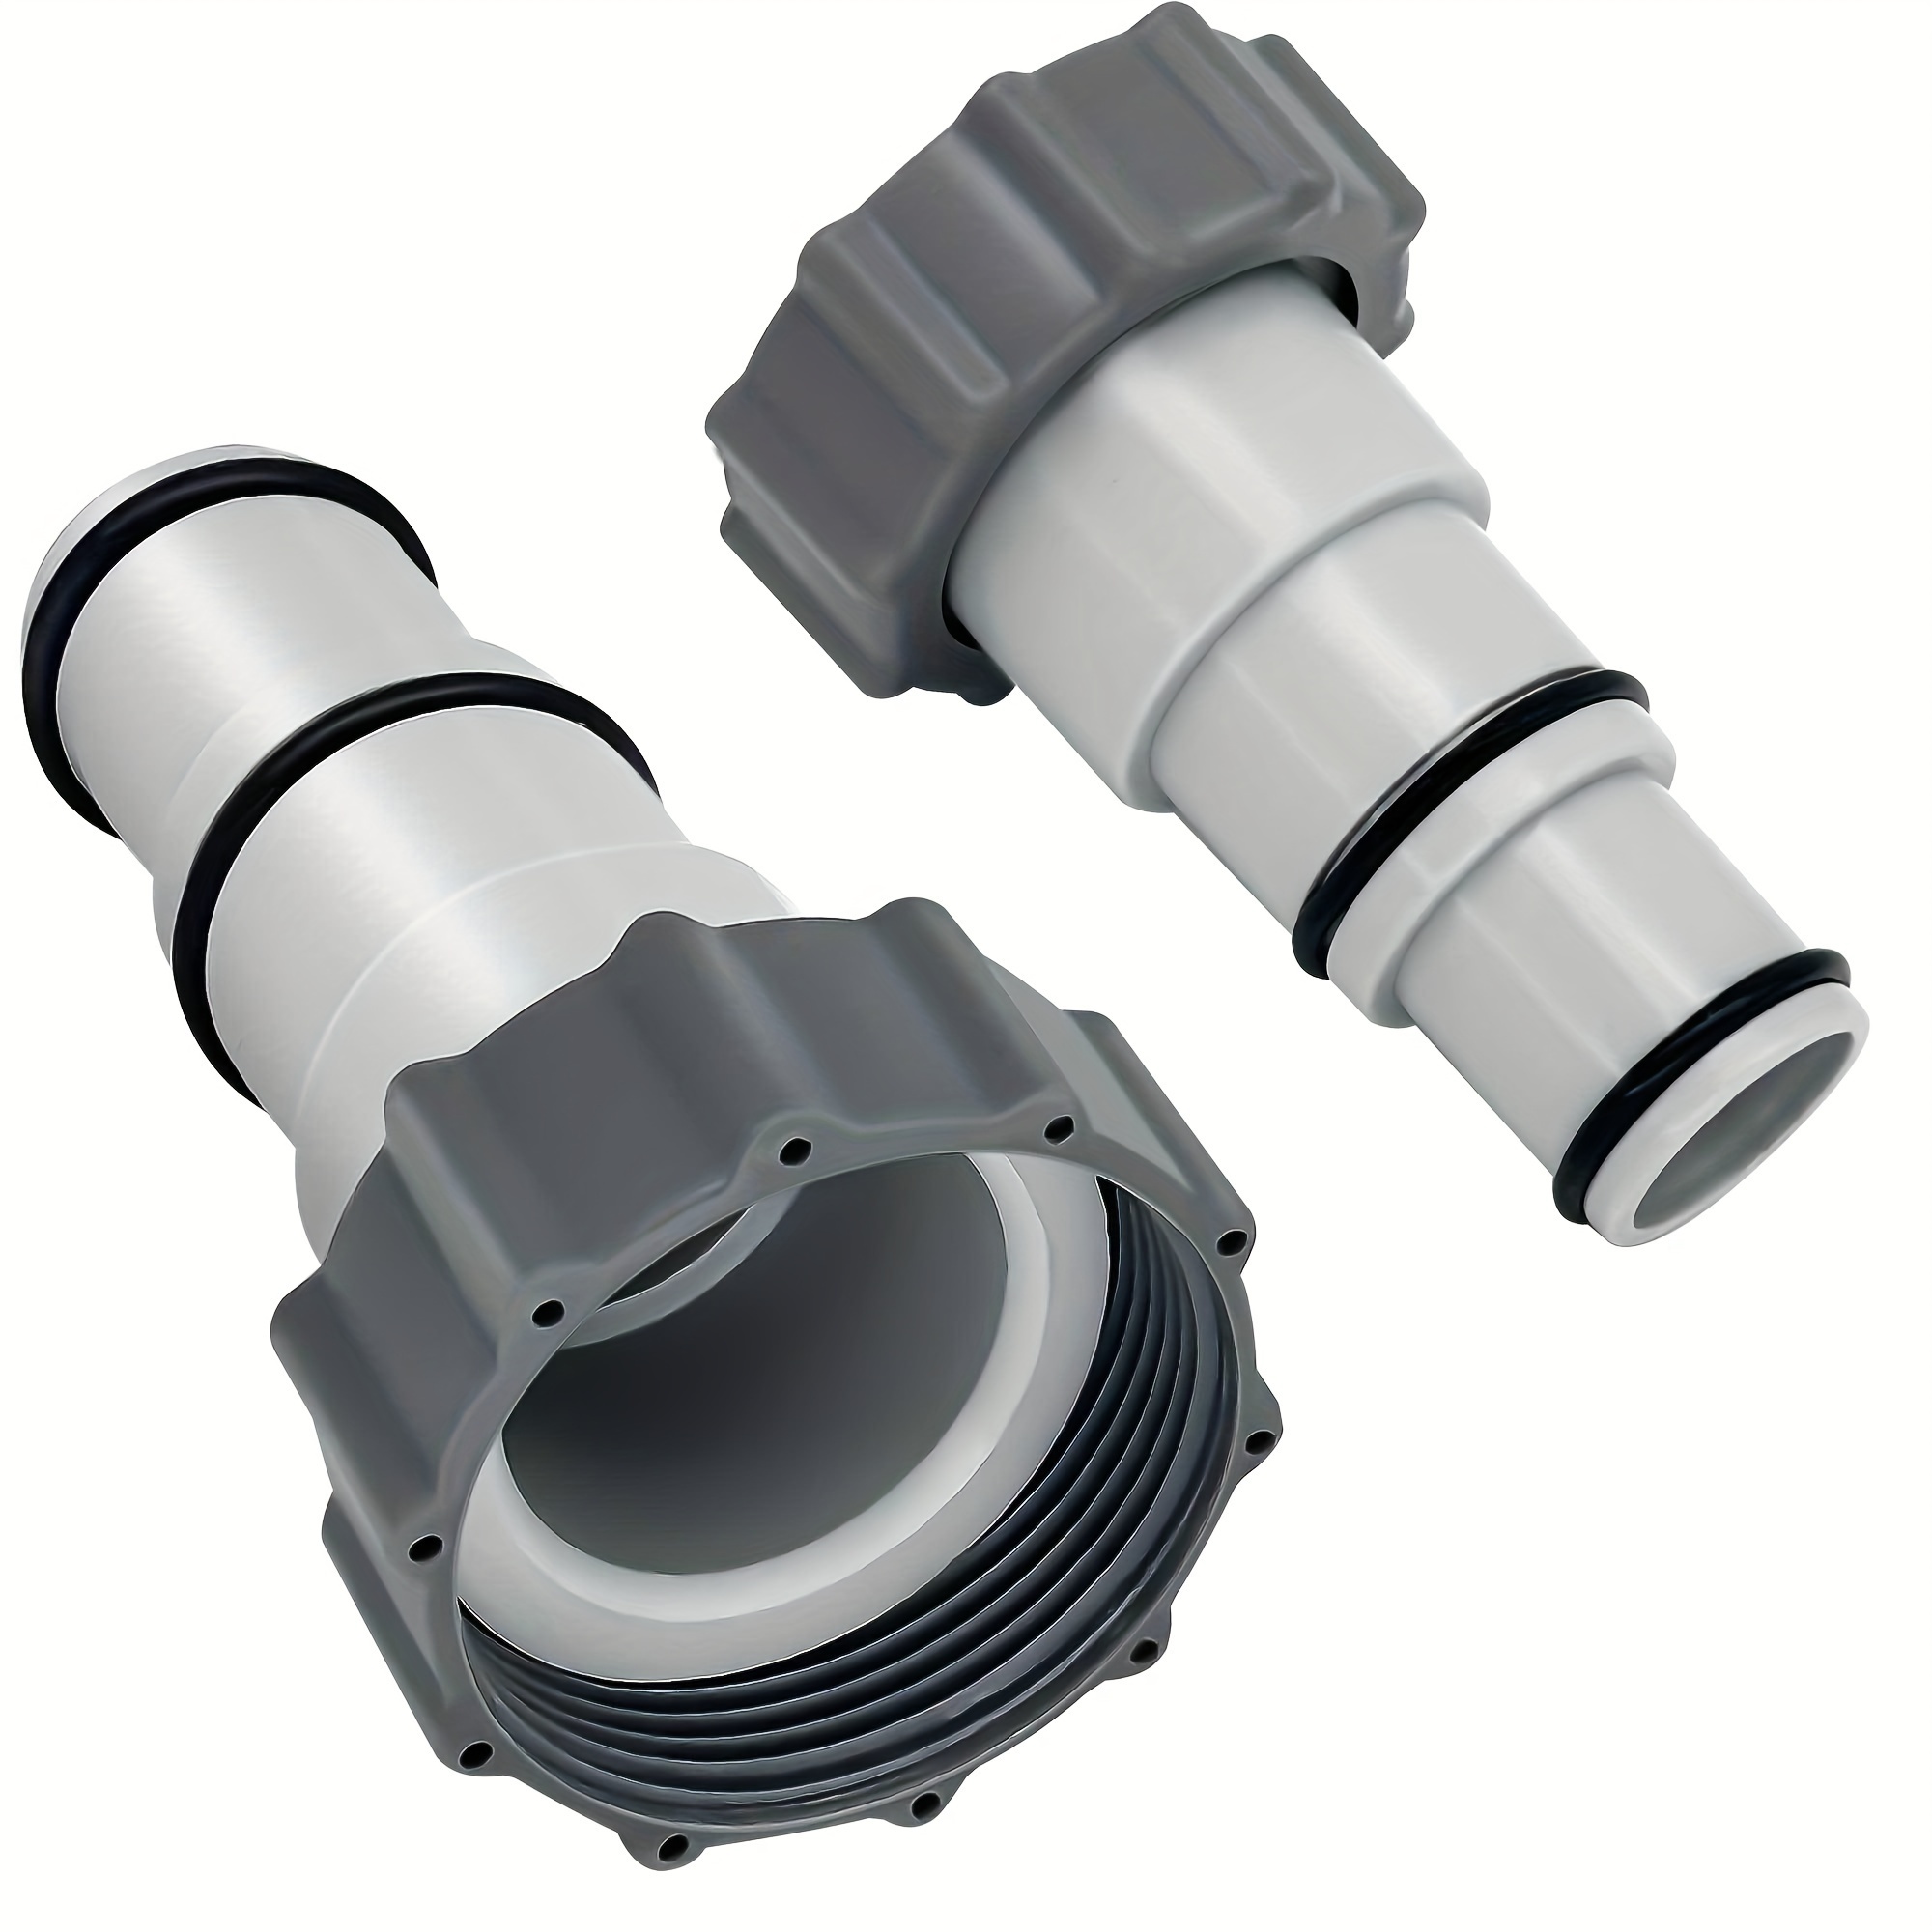 

1/2pcs, Pool Hose Conversion Adapters, Compatible With 4000, 2500, 2000, And 1500 Gph Filter Pumps, Threaded Connection, Grey, Replacement Parts, Size 4.3 X 2.82 Inches